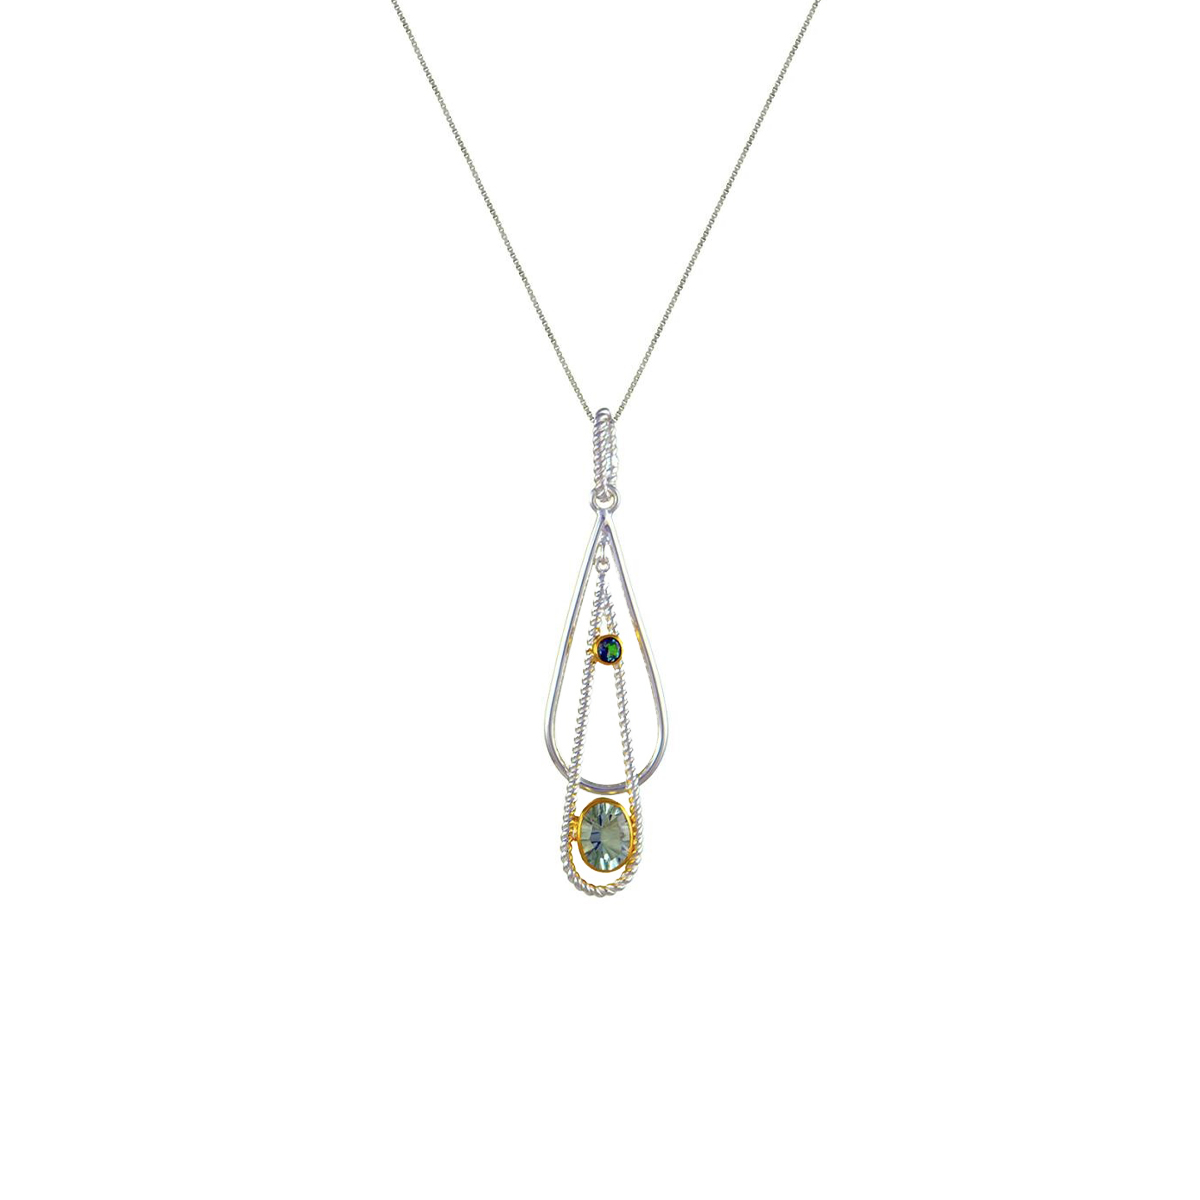 Two-Tone Topaz and Green Amethyst Pendant with Chain